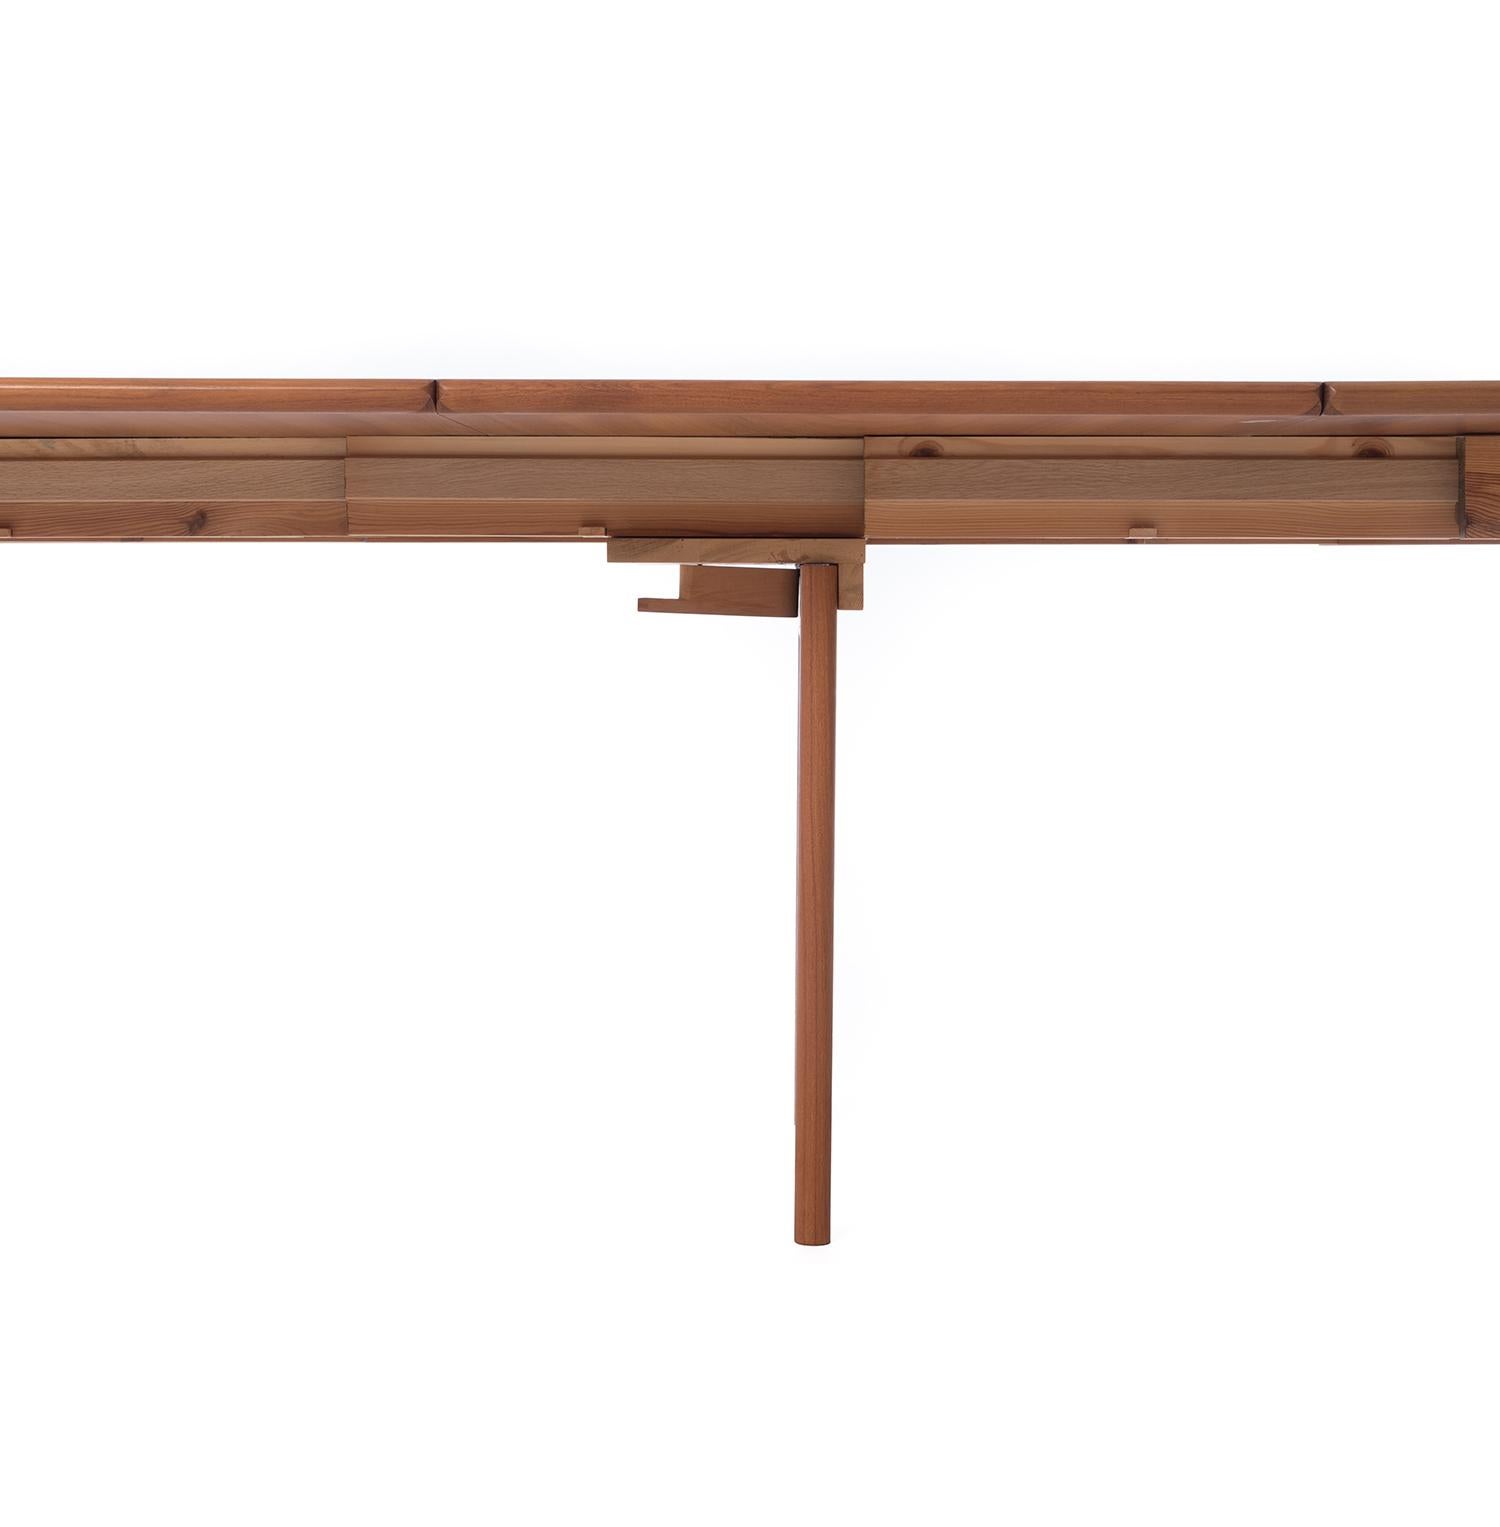 This Classic dining table made from old growth teak was designed by Hans J. Wegner and made by Johannes Hansen. Three interlocking leaves are removable, when fully extended seats 12-14 people. This table is 70.25